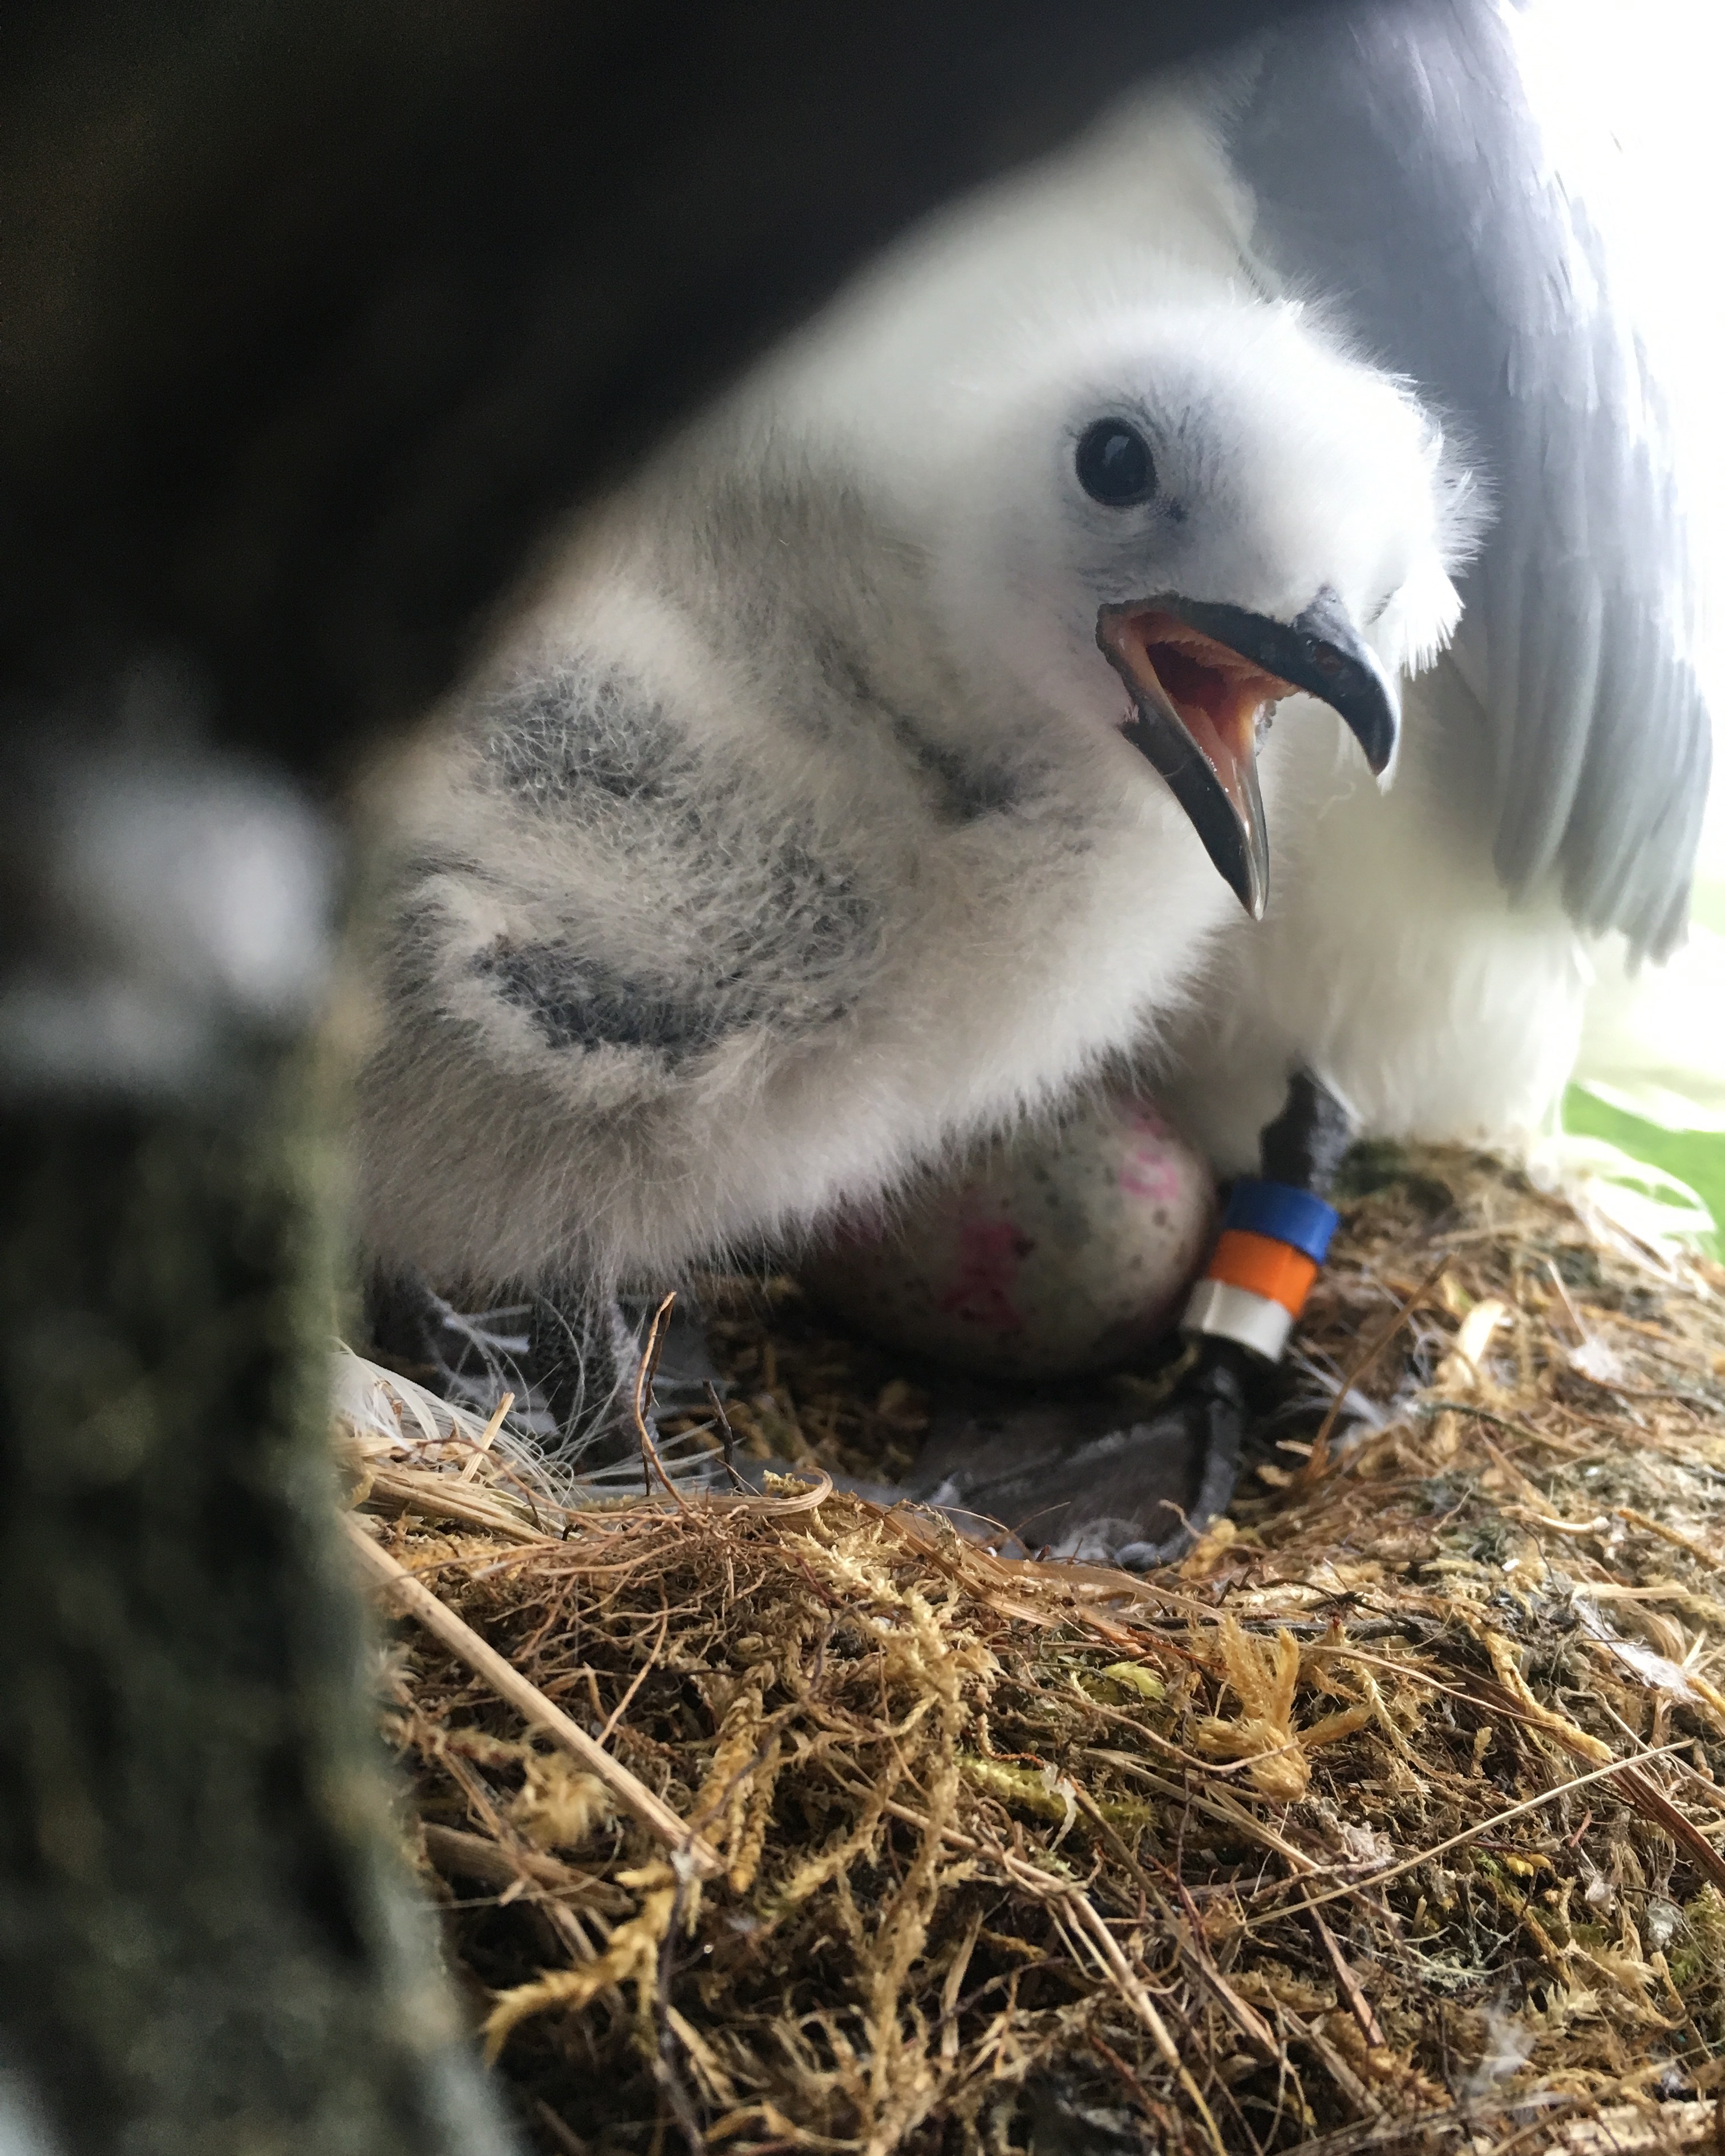 A white fluffy chicks stands with beak partially open, looking sideways at the camera. The belly and legs of a white adult kittiwake, which blue, orange and white color bands visible, can be seen behind the chick, along with a single unhatched egg. 